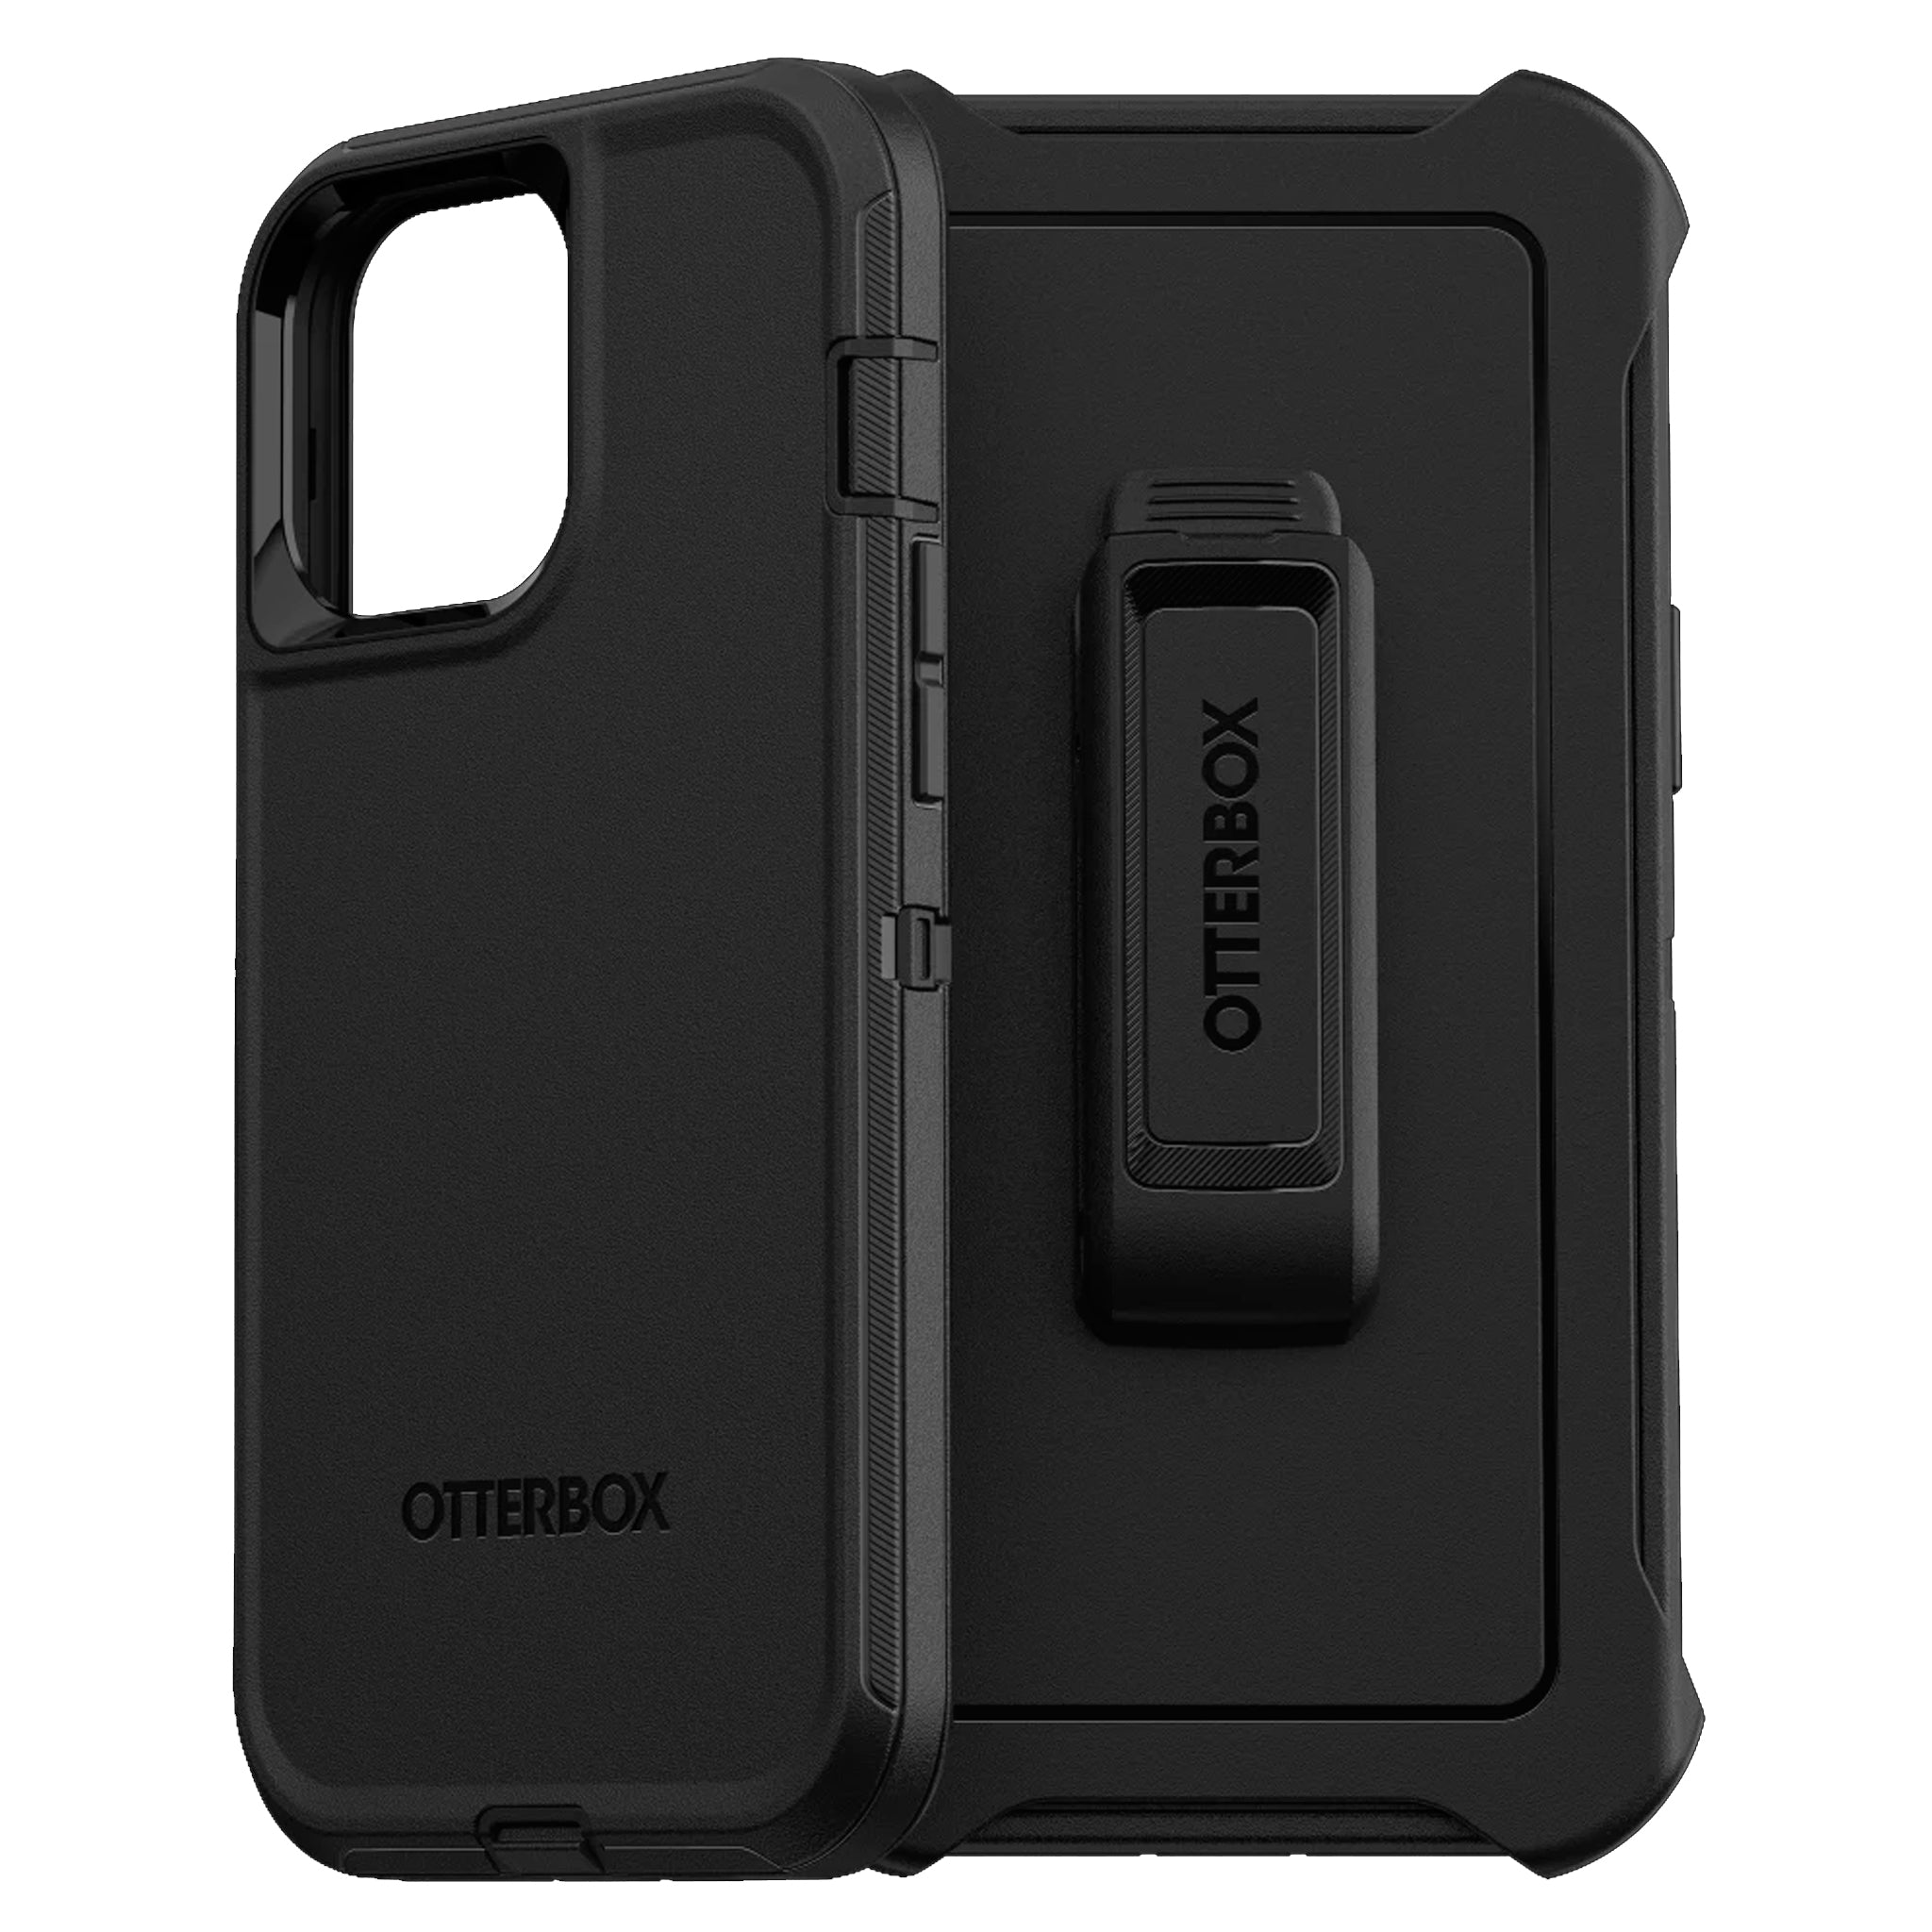 OtterBox - Defender Case for Iphone 12/13 Pro Max - Black